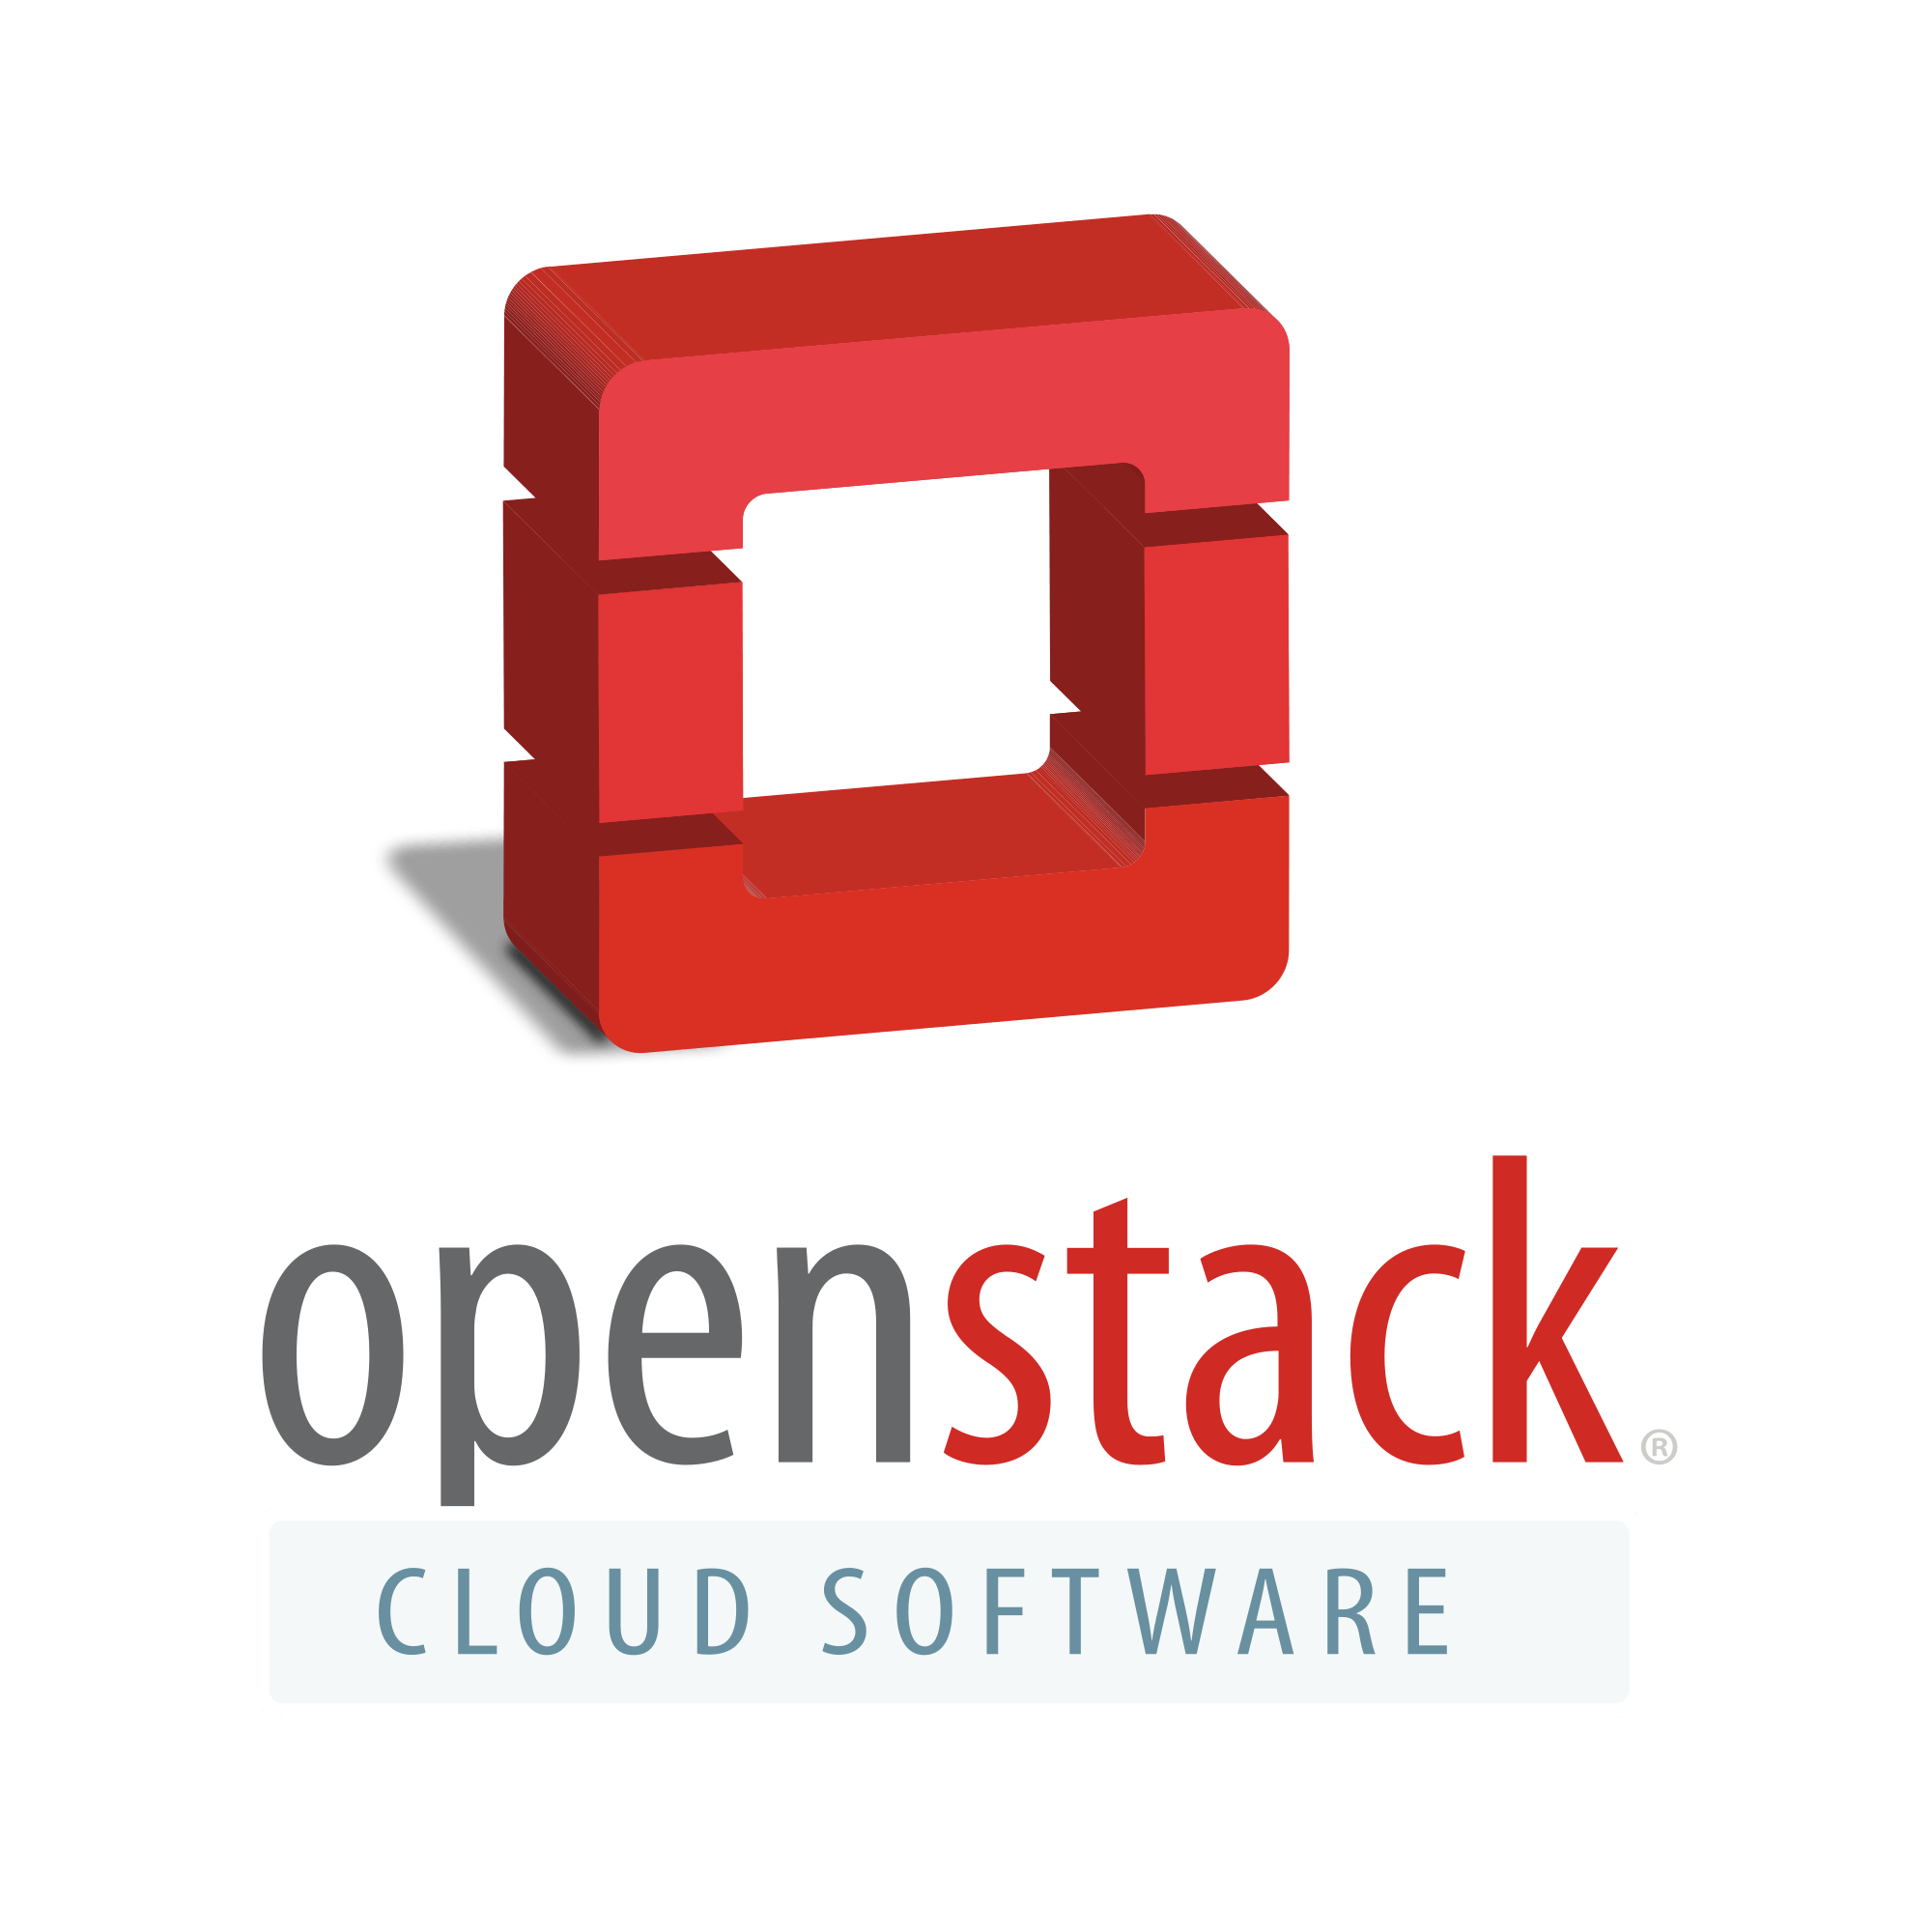 OpenStack Logo - File:The OpenStack logo.svg - Wikimedia Commons